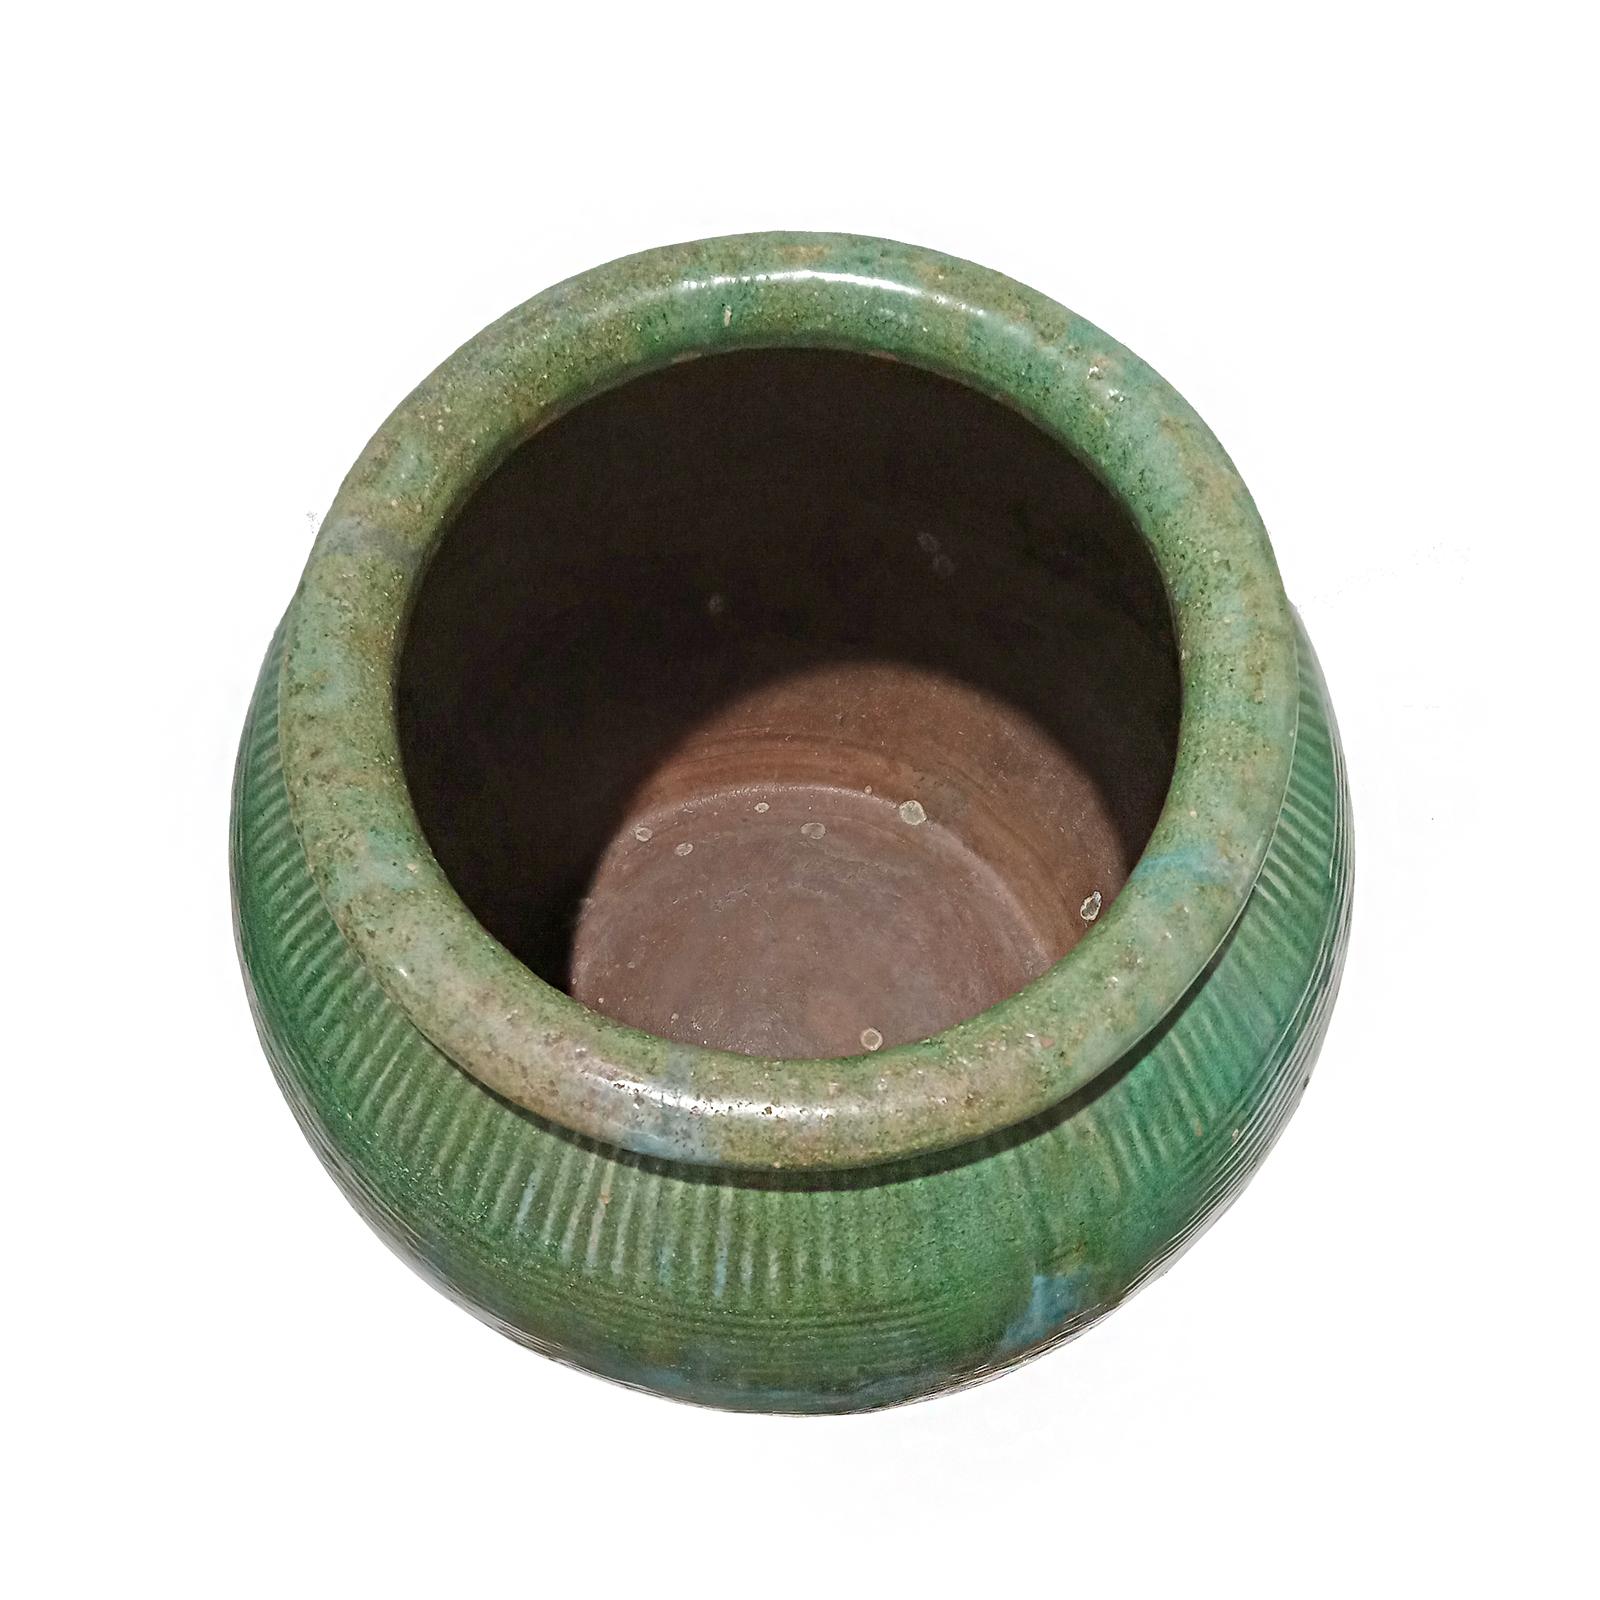 Balinese Terracotta Vase / Jar / Urn with Green Glaze, Contemporary For Sale 2